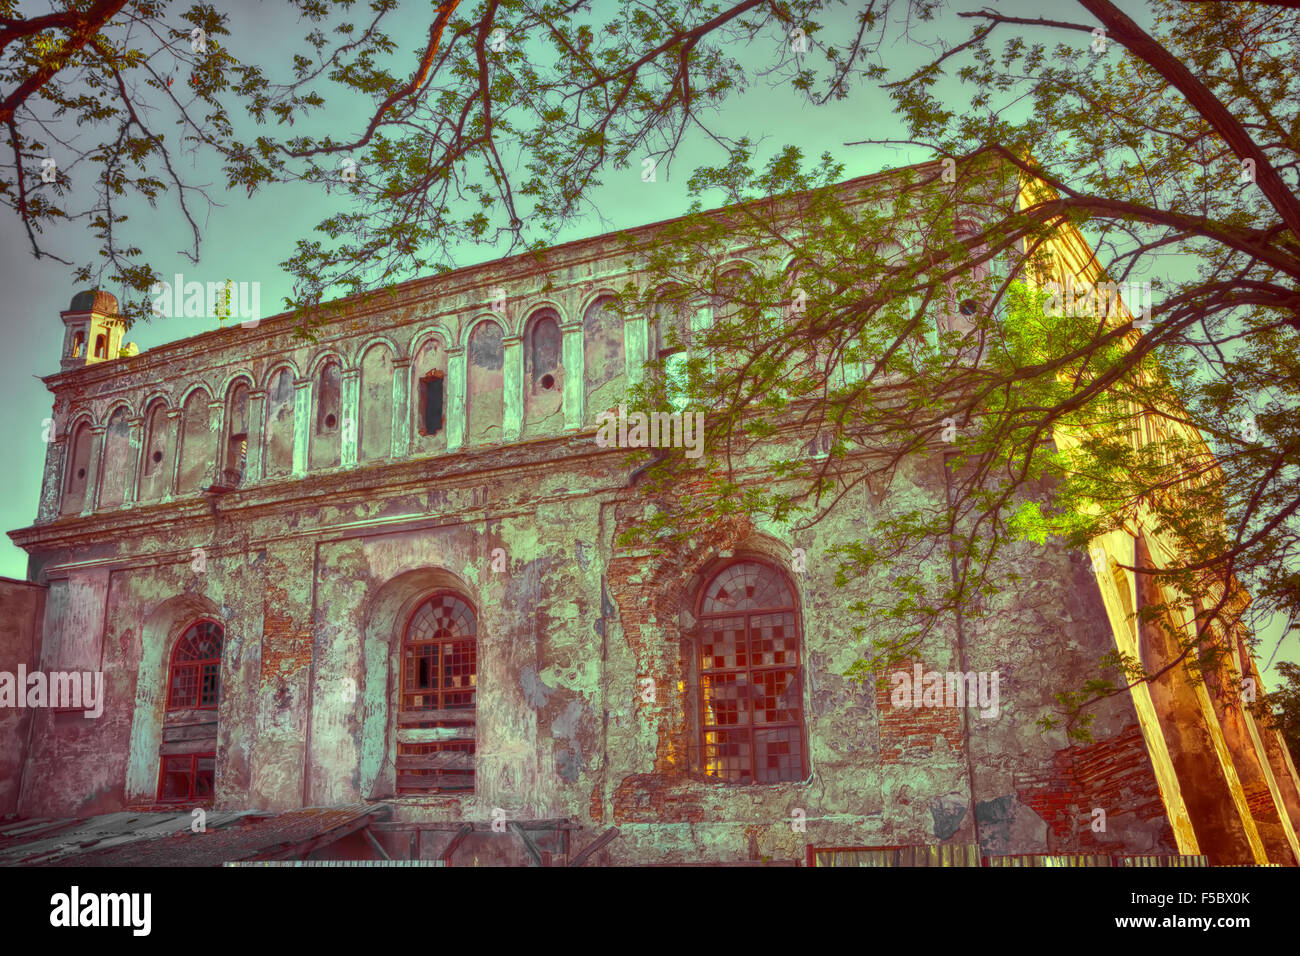 Synagogue in Zhovkva Lviv region founded in 1692-1698. March 2015. Vintage soft effect, warm toning Stock Photo